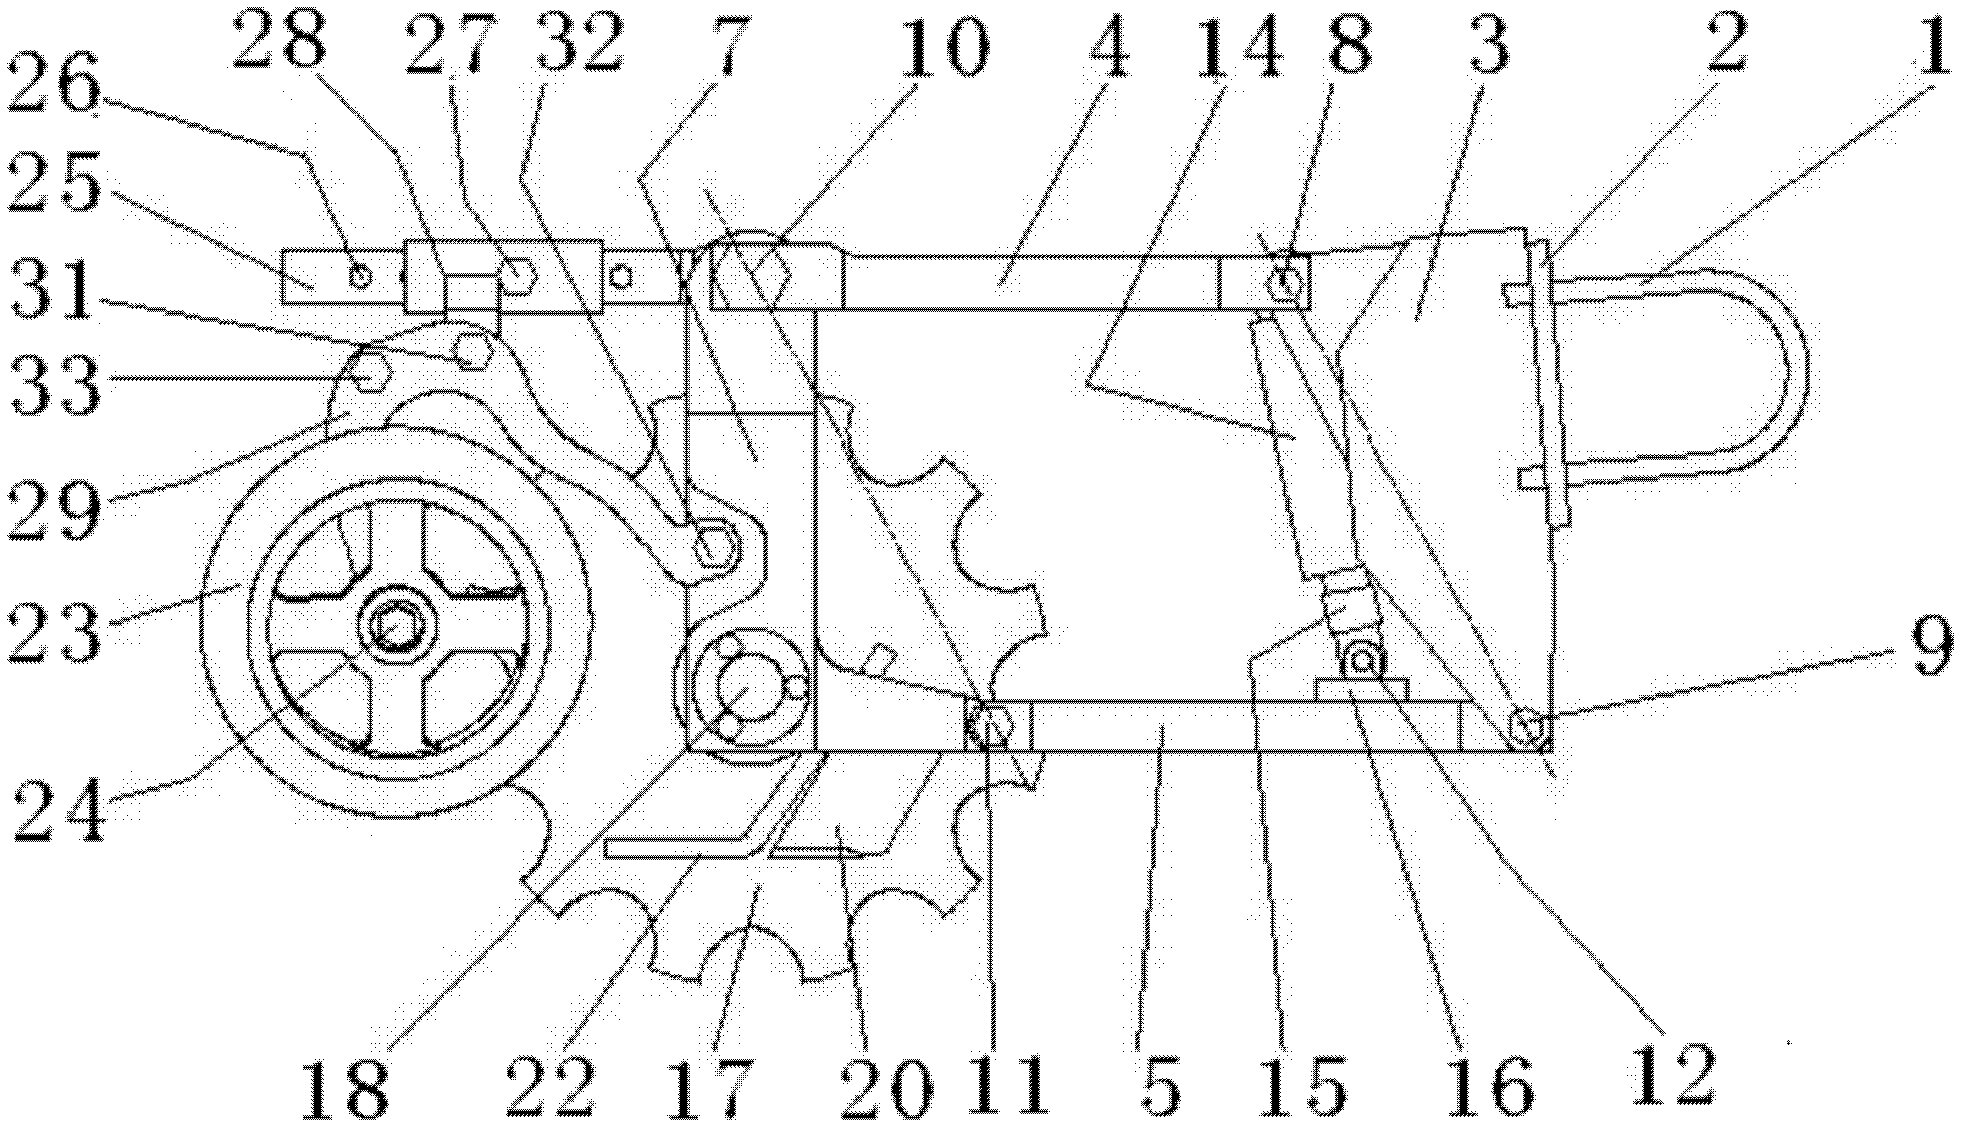 Furrowing and sowing device for separately sowing and applying fertilizer horizontally